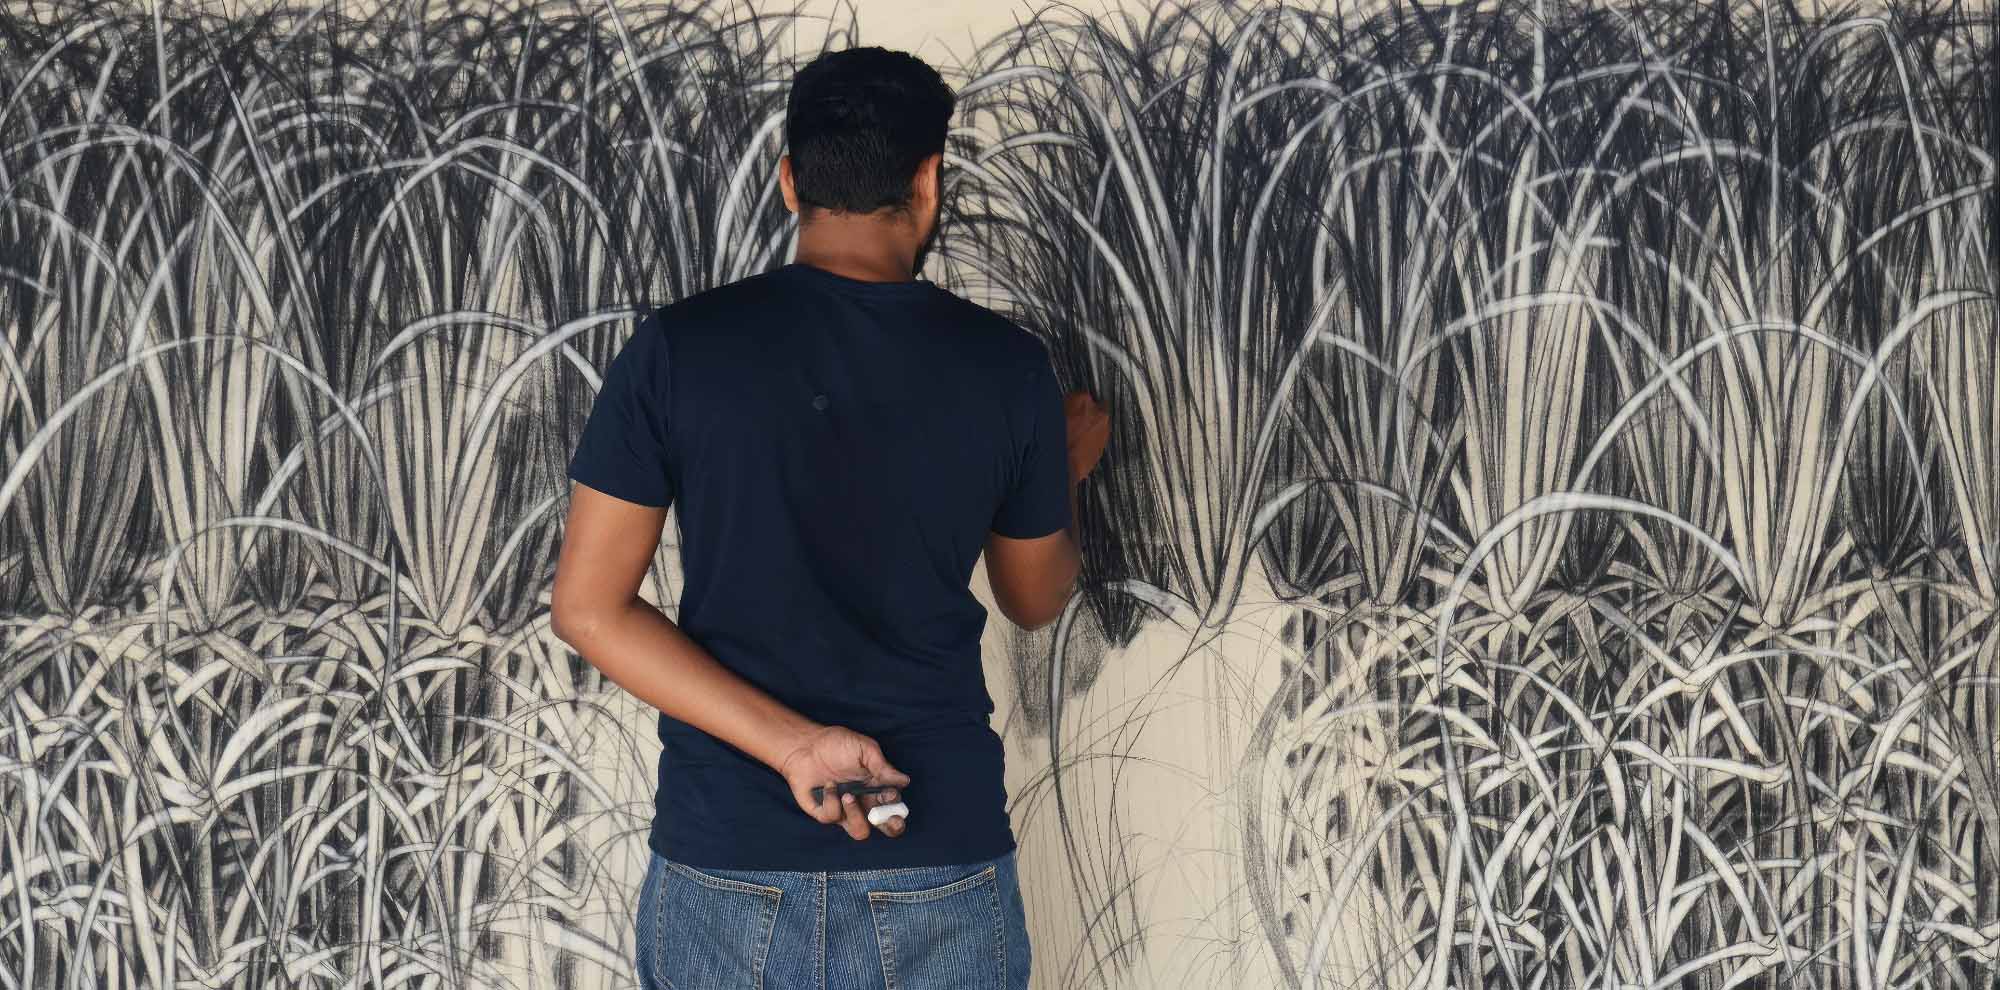 A man draws grass with charcoal and chalk on a wall with his back facing the viewer.